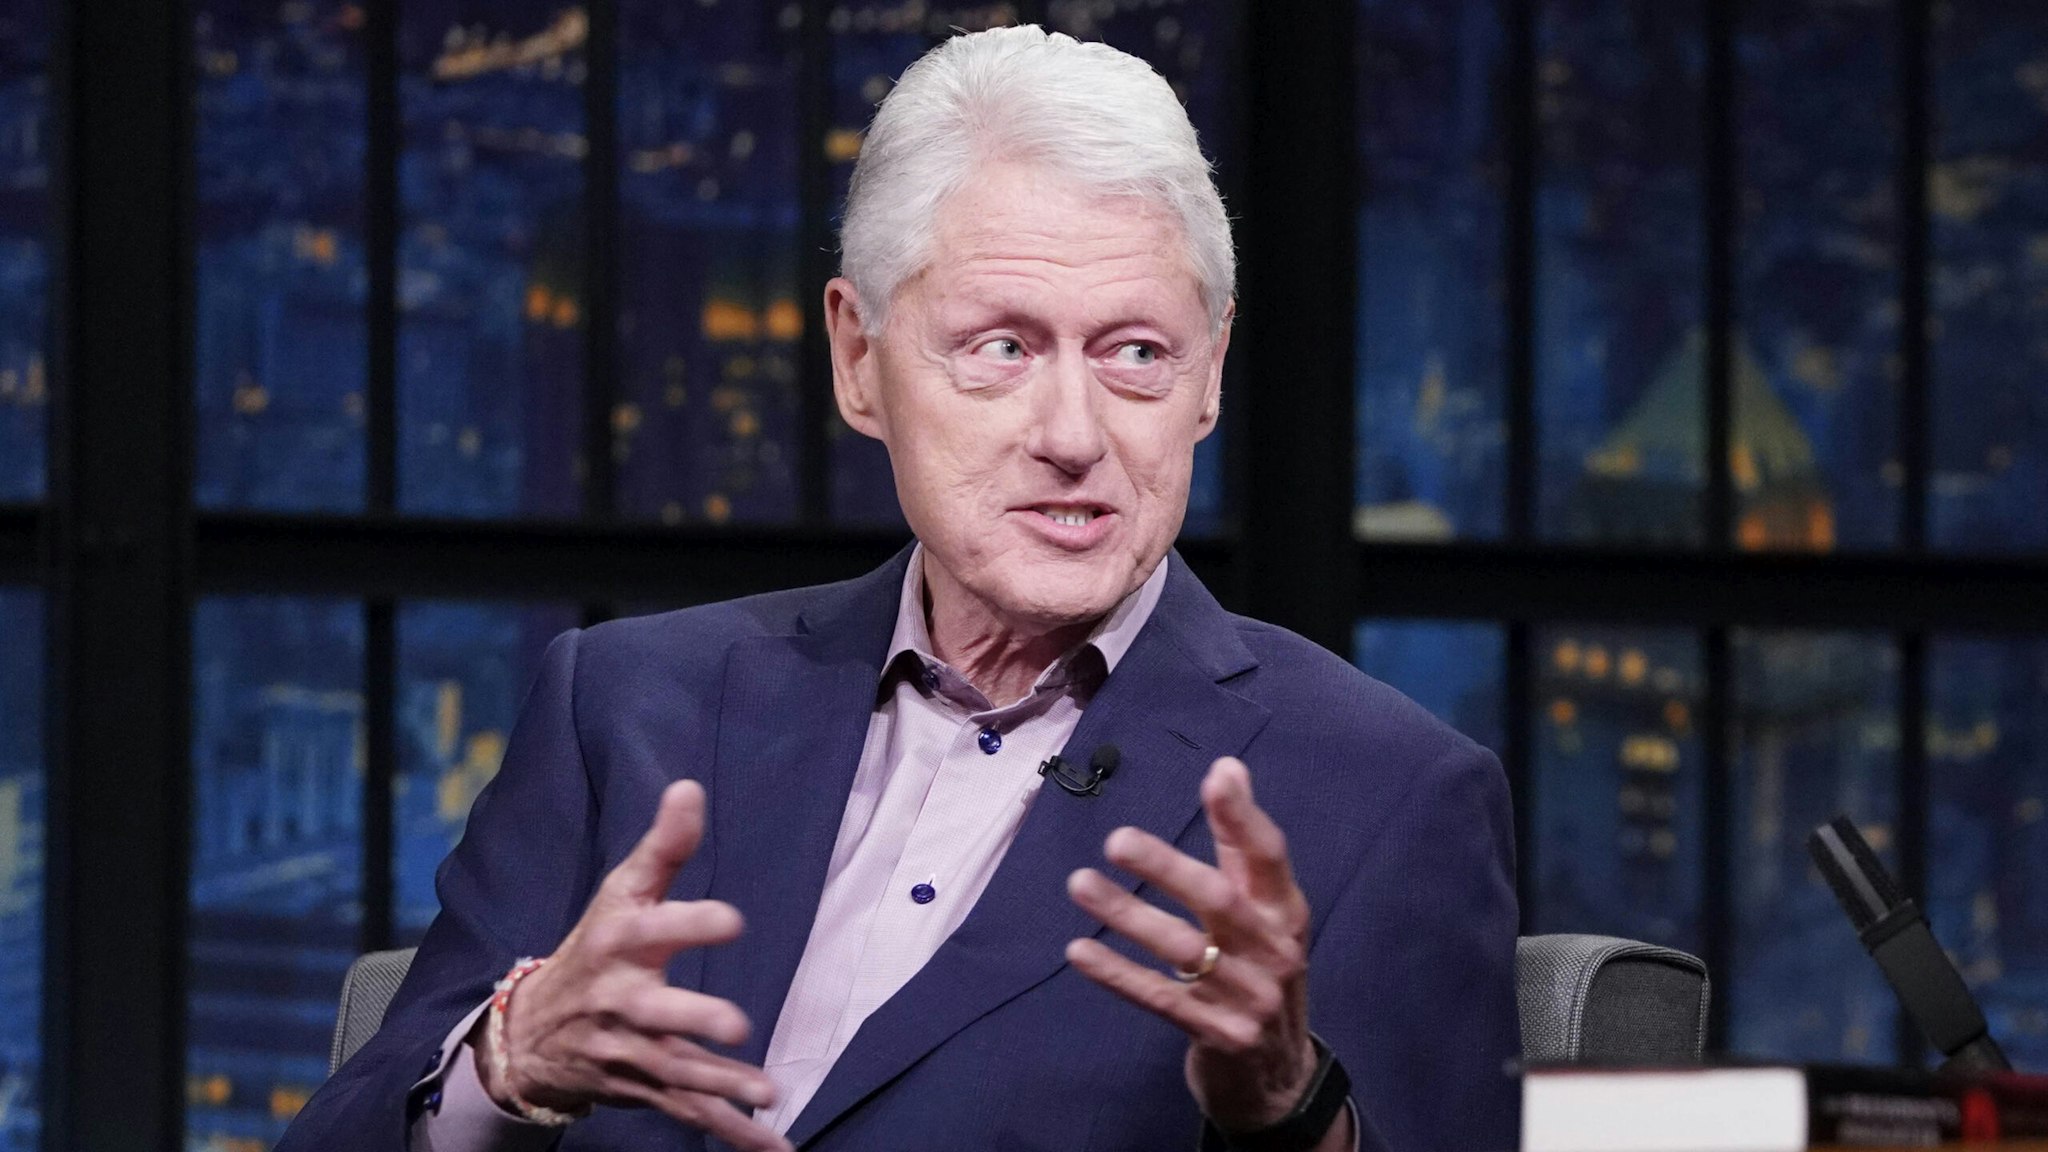 LATE NIGHT WITH SETH MEYERS -- Episode 1165A -- Pictured: Former President Bill Clinton on June 23, 2021